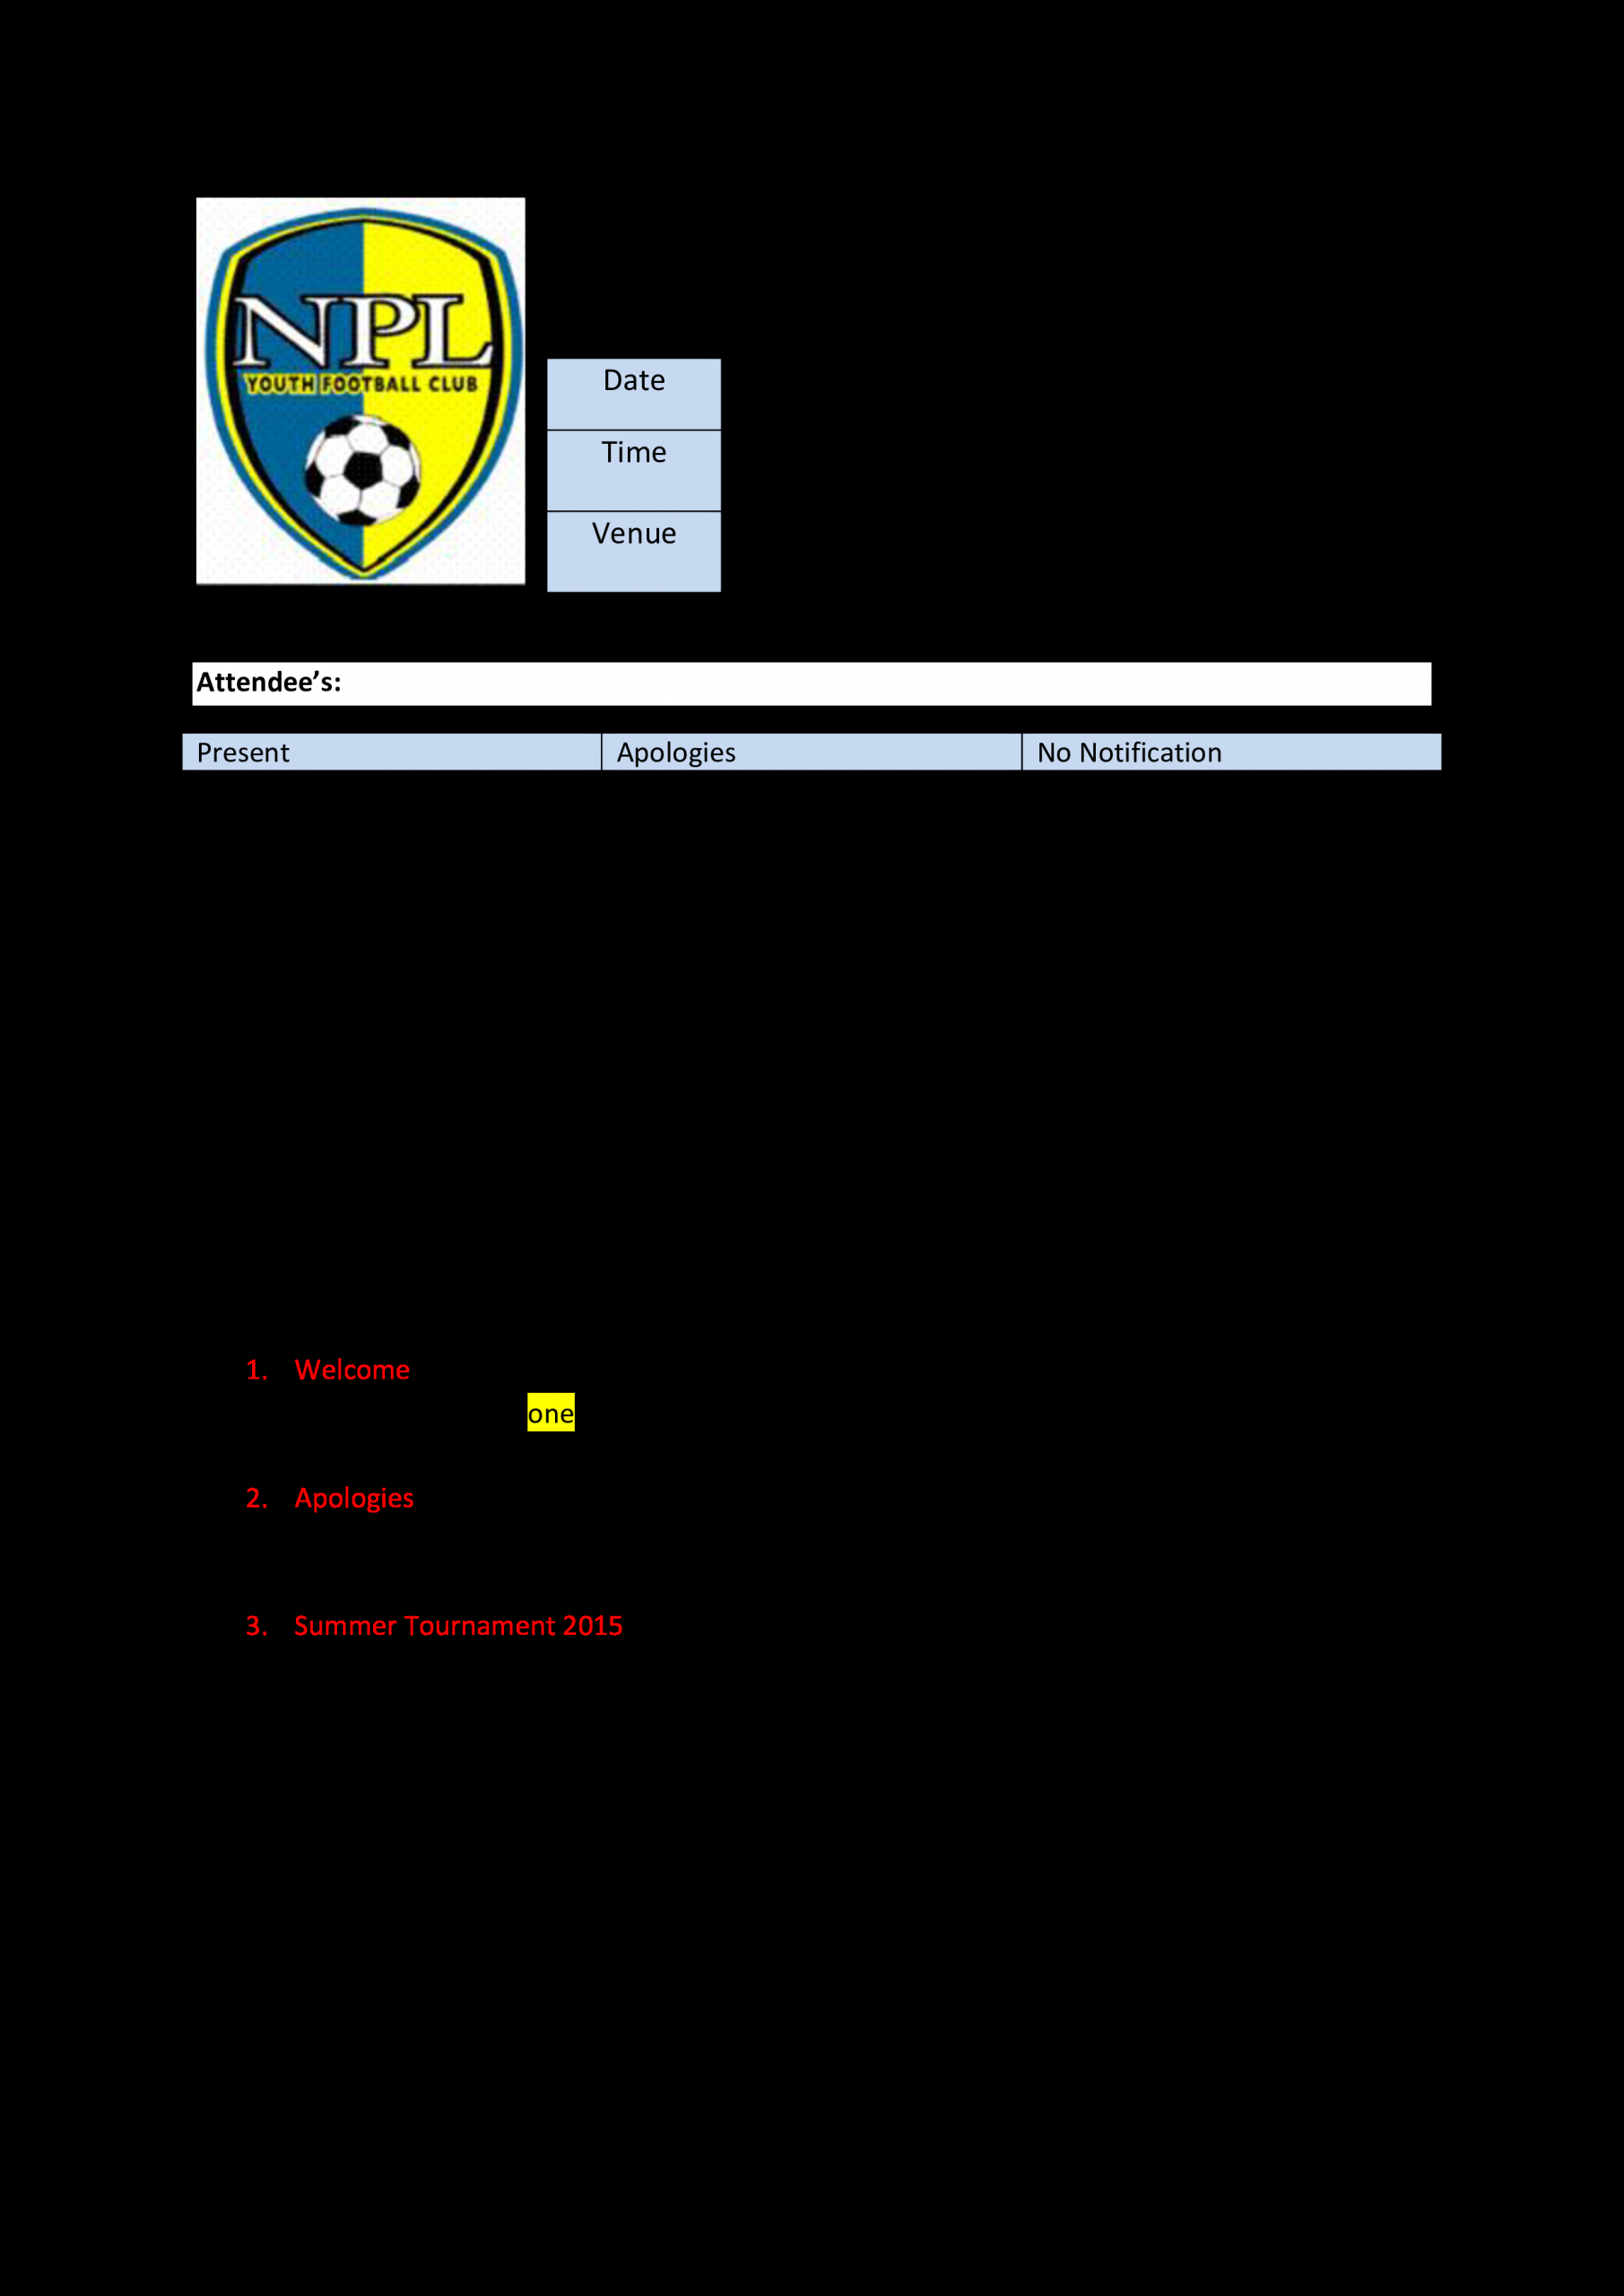 Football Club Meeting Agenda Templates At for size 2481 X 3508